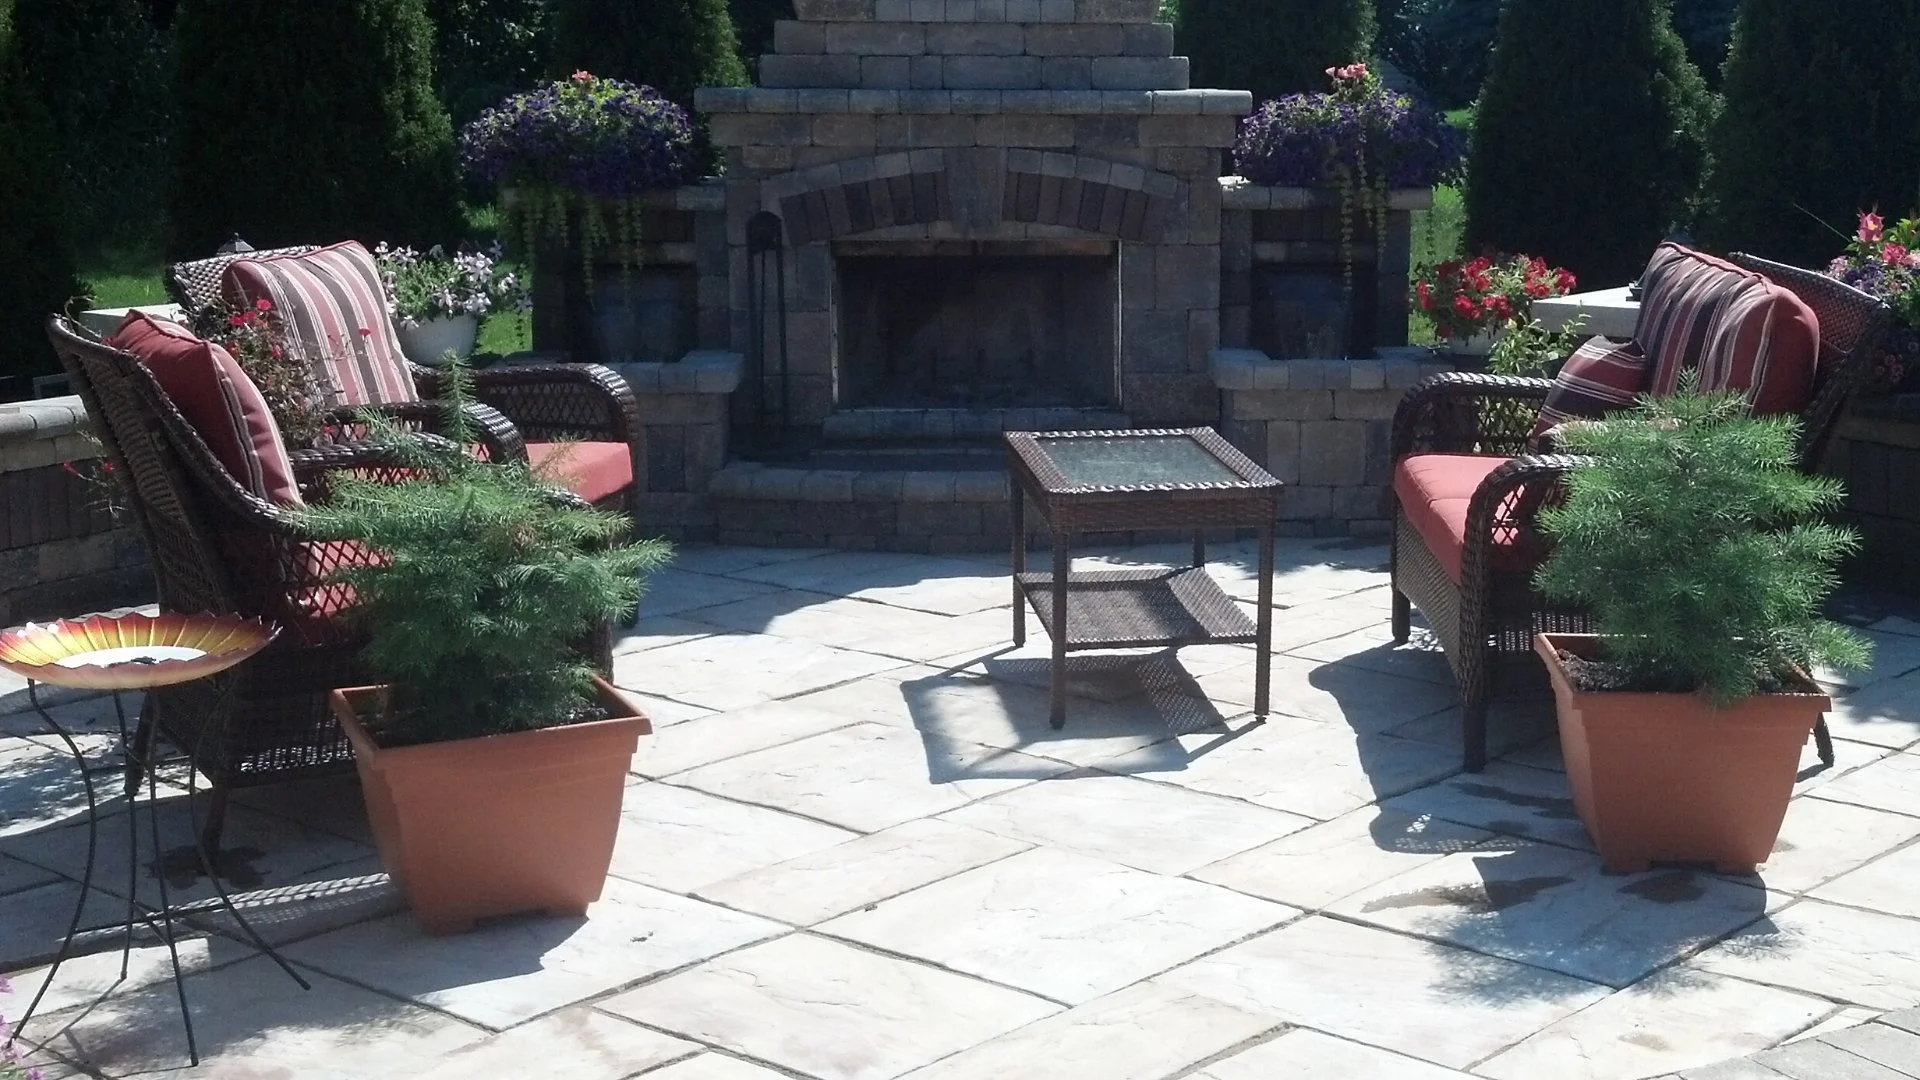 Are Pavers a Good Material Choice to Use for My New Patio?